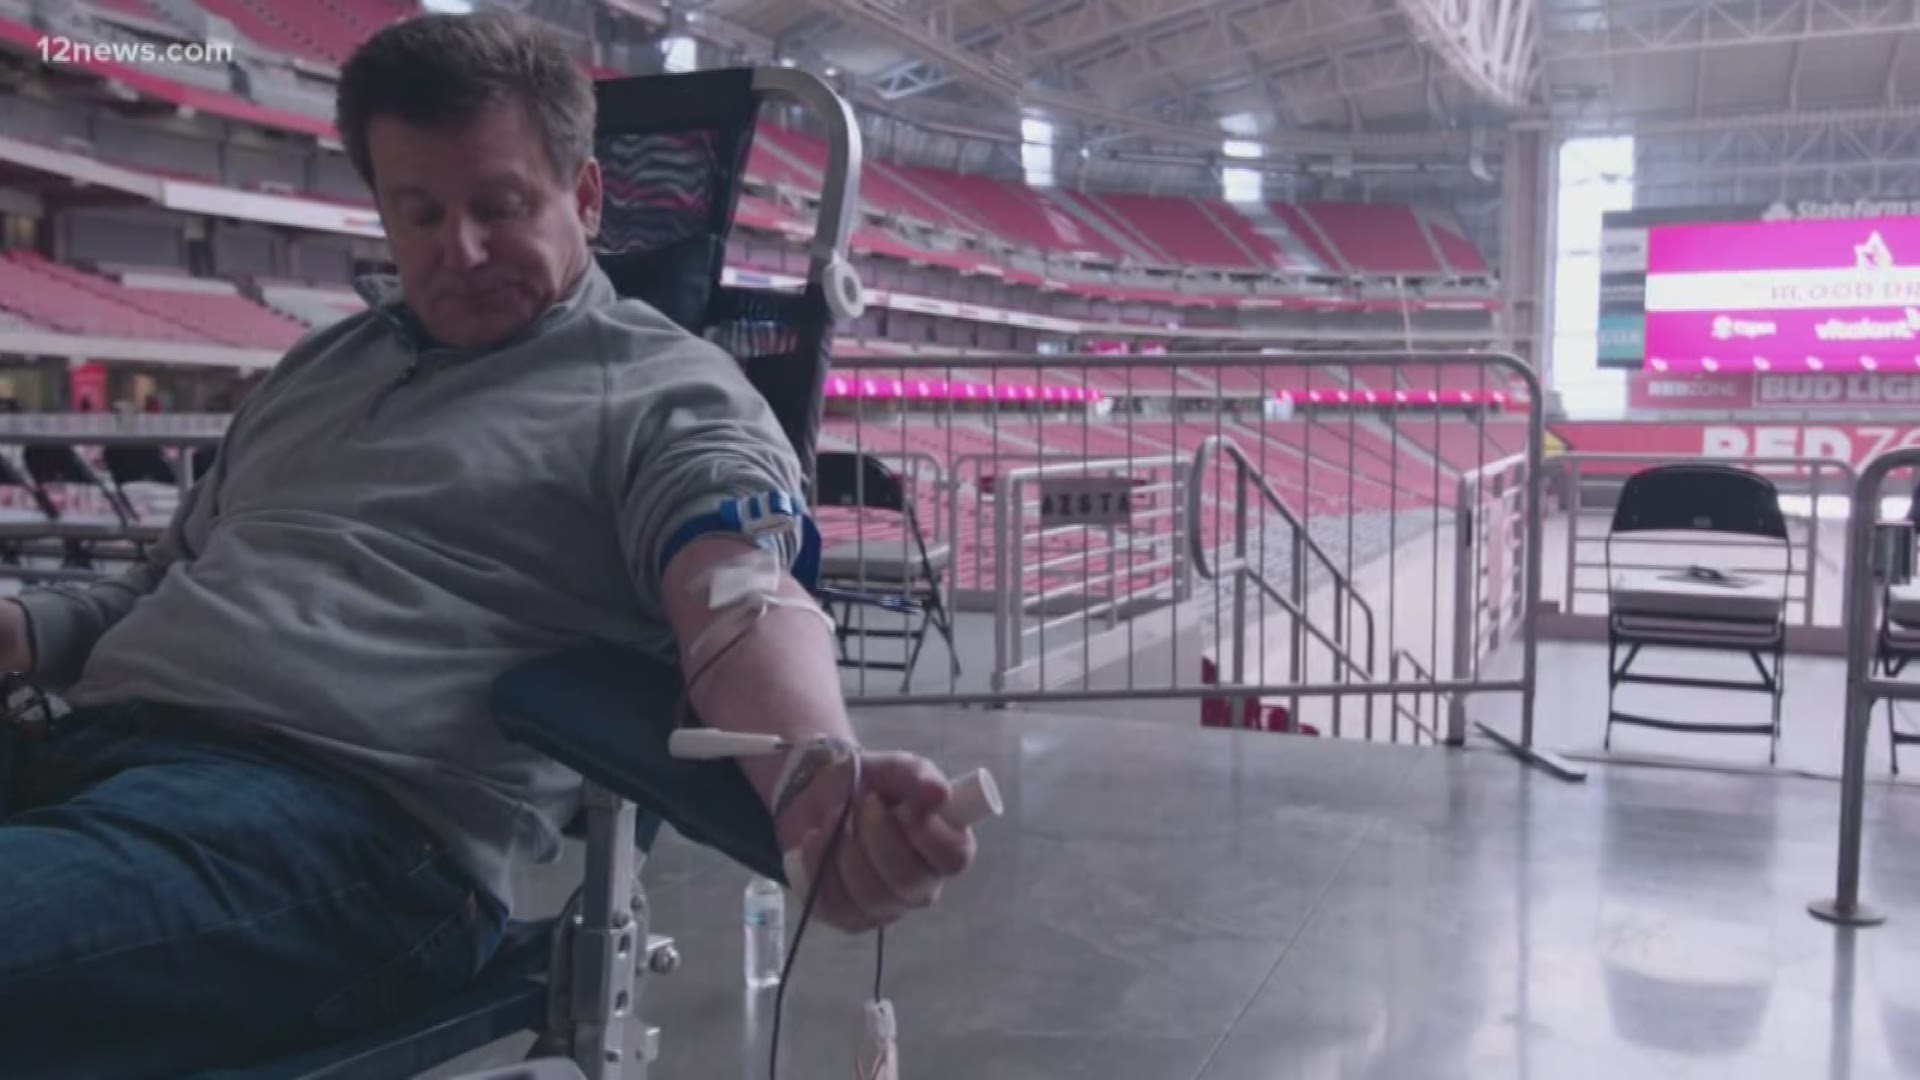 One of the most critical things needed right now is blood. The Arizona Cardinals did their part by hosting a blood donation drive at State Farm Stadium.